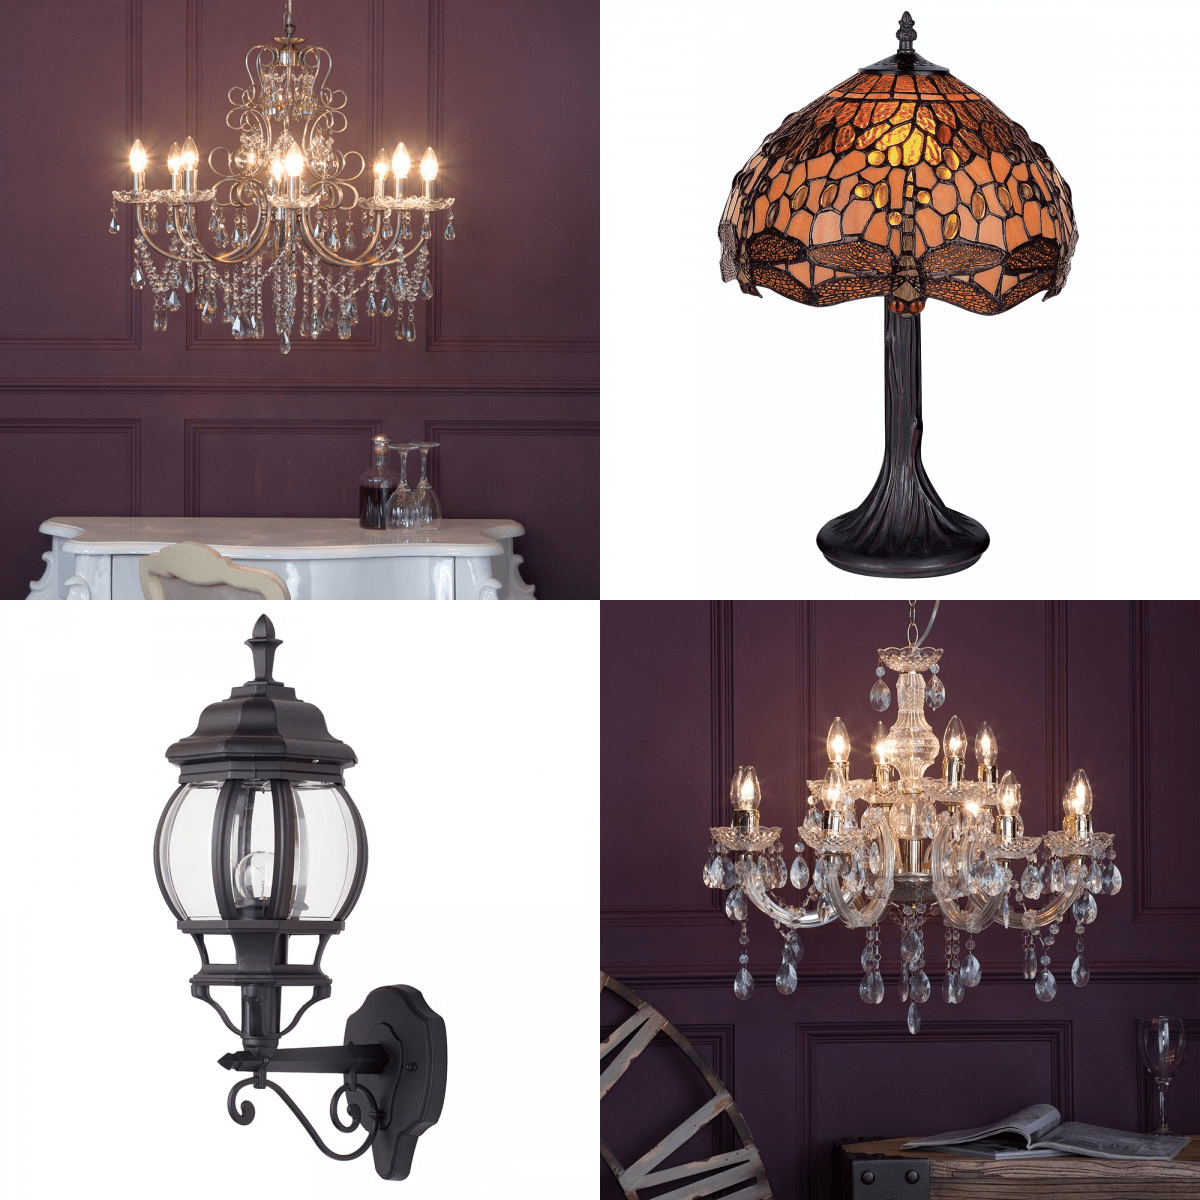 How to add character to your home with vintage style lighting - Litecraft